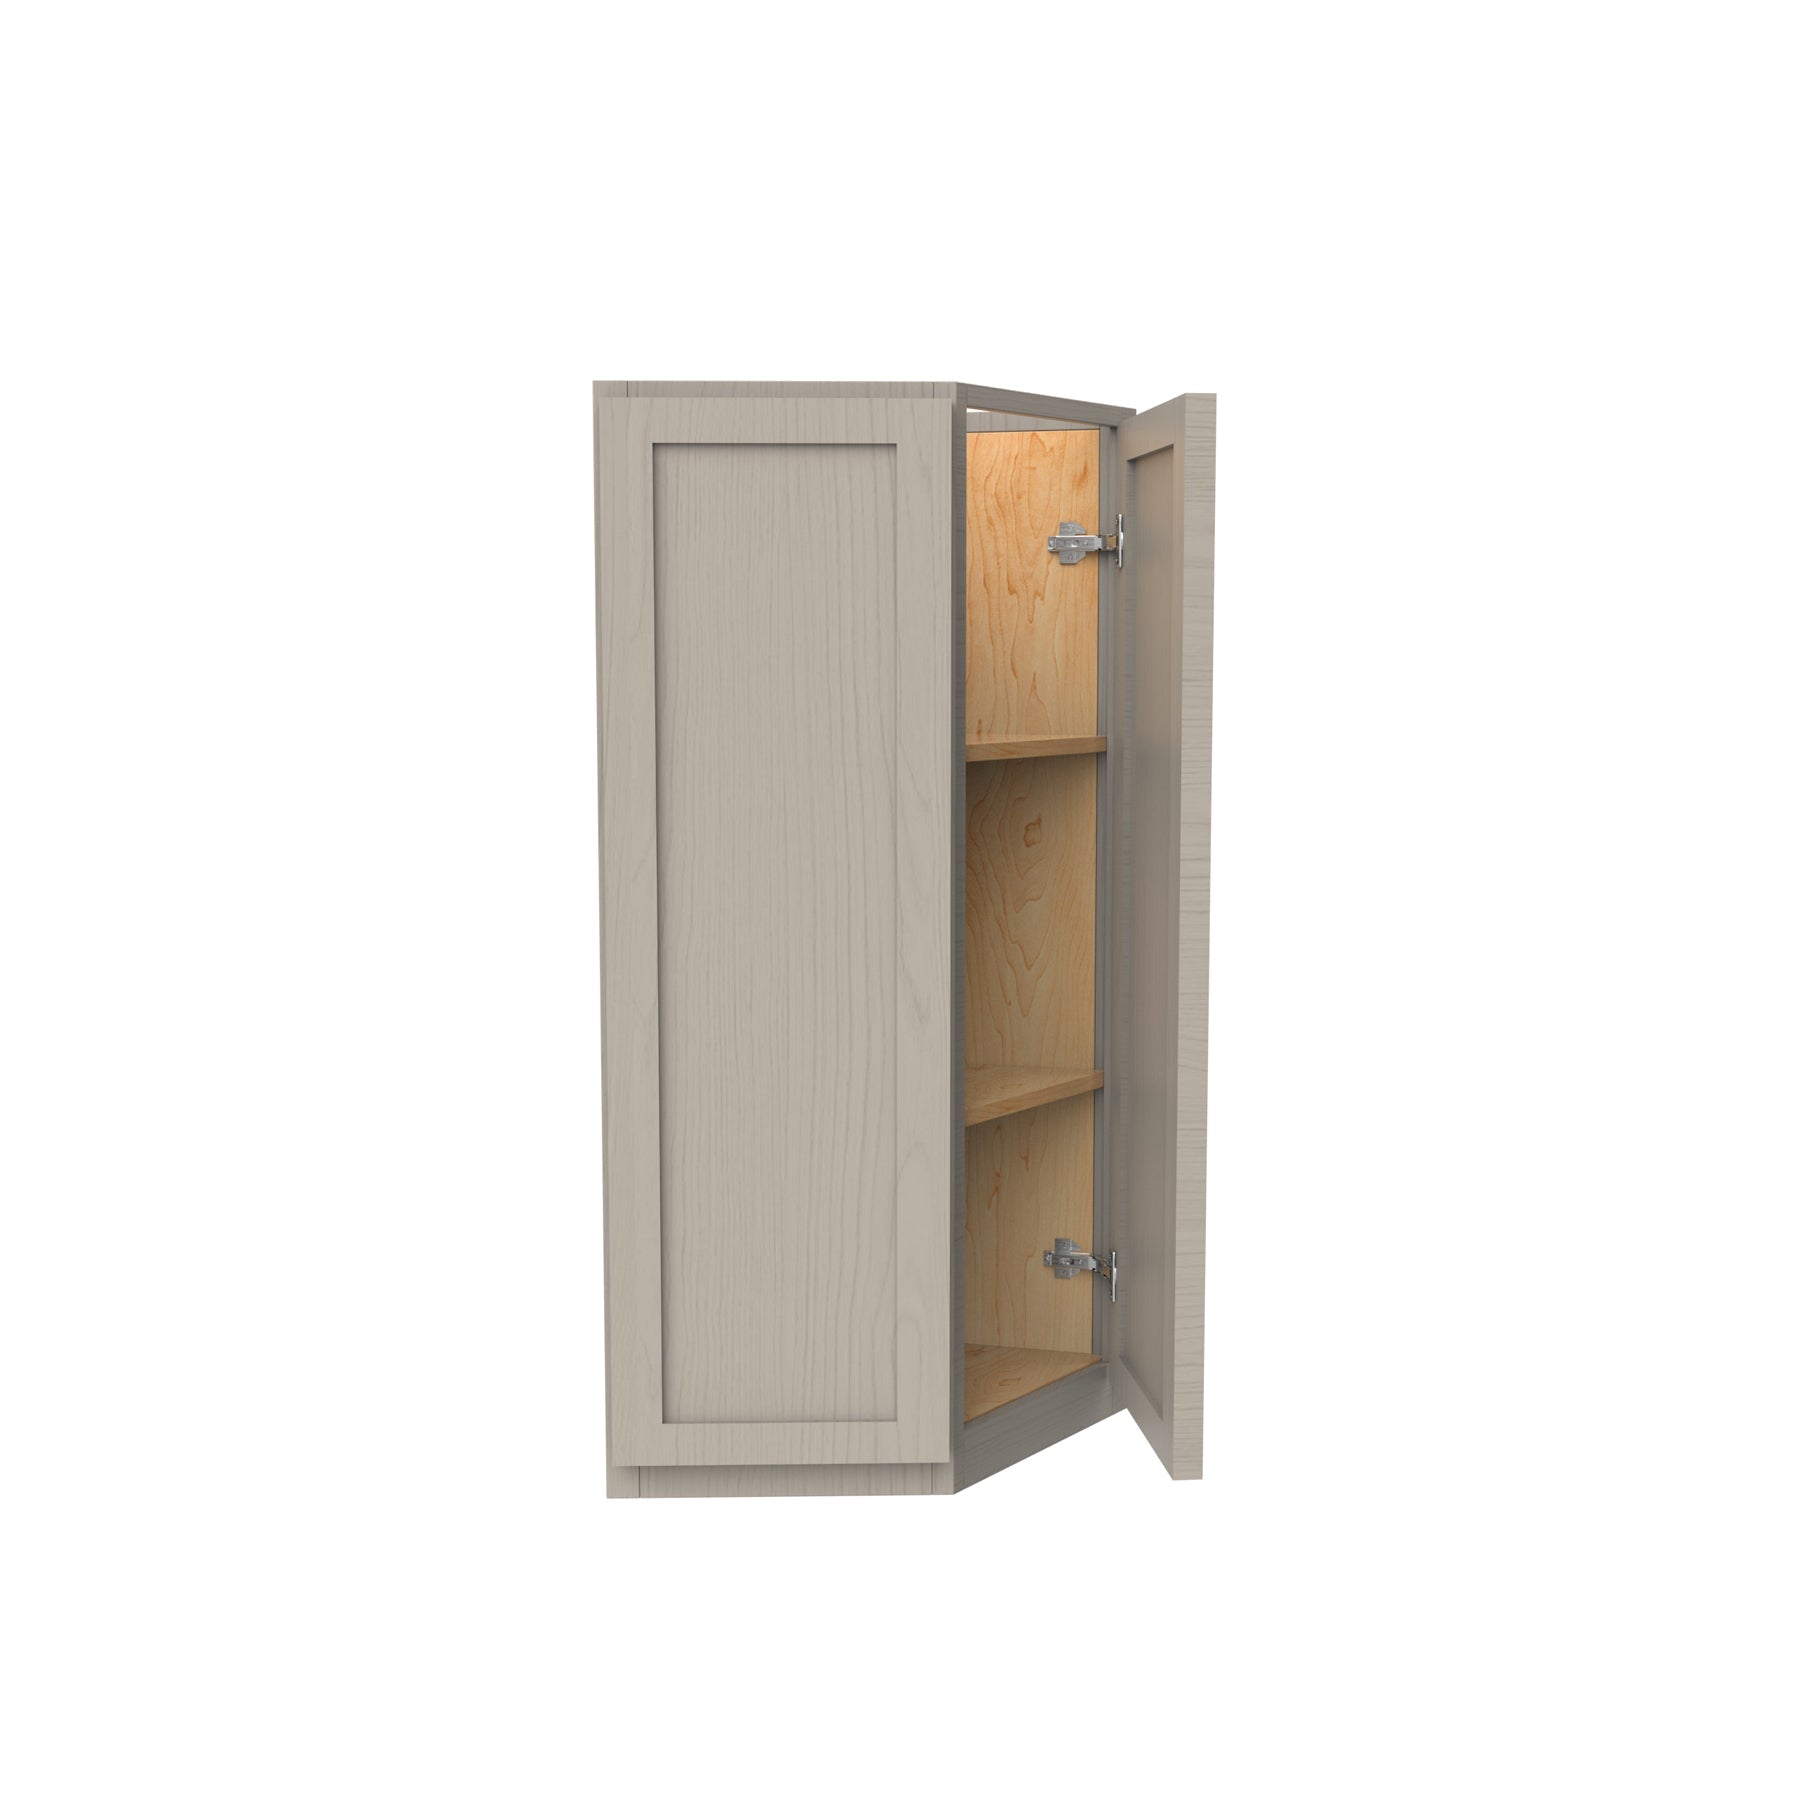 RTA - Elegant Stone - Double Door Wall End Cabinet | 12"W x 30"H x 12"D